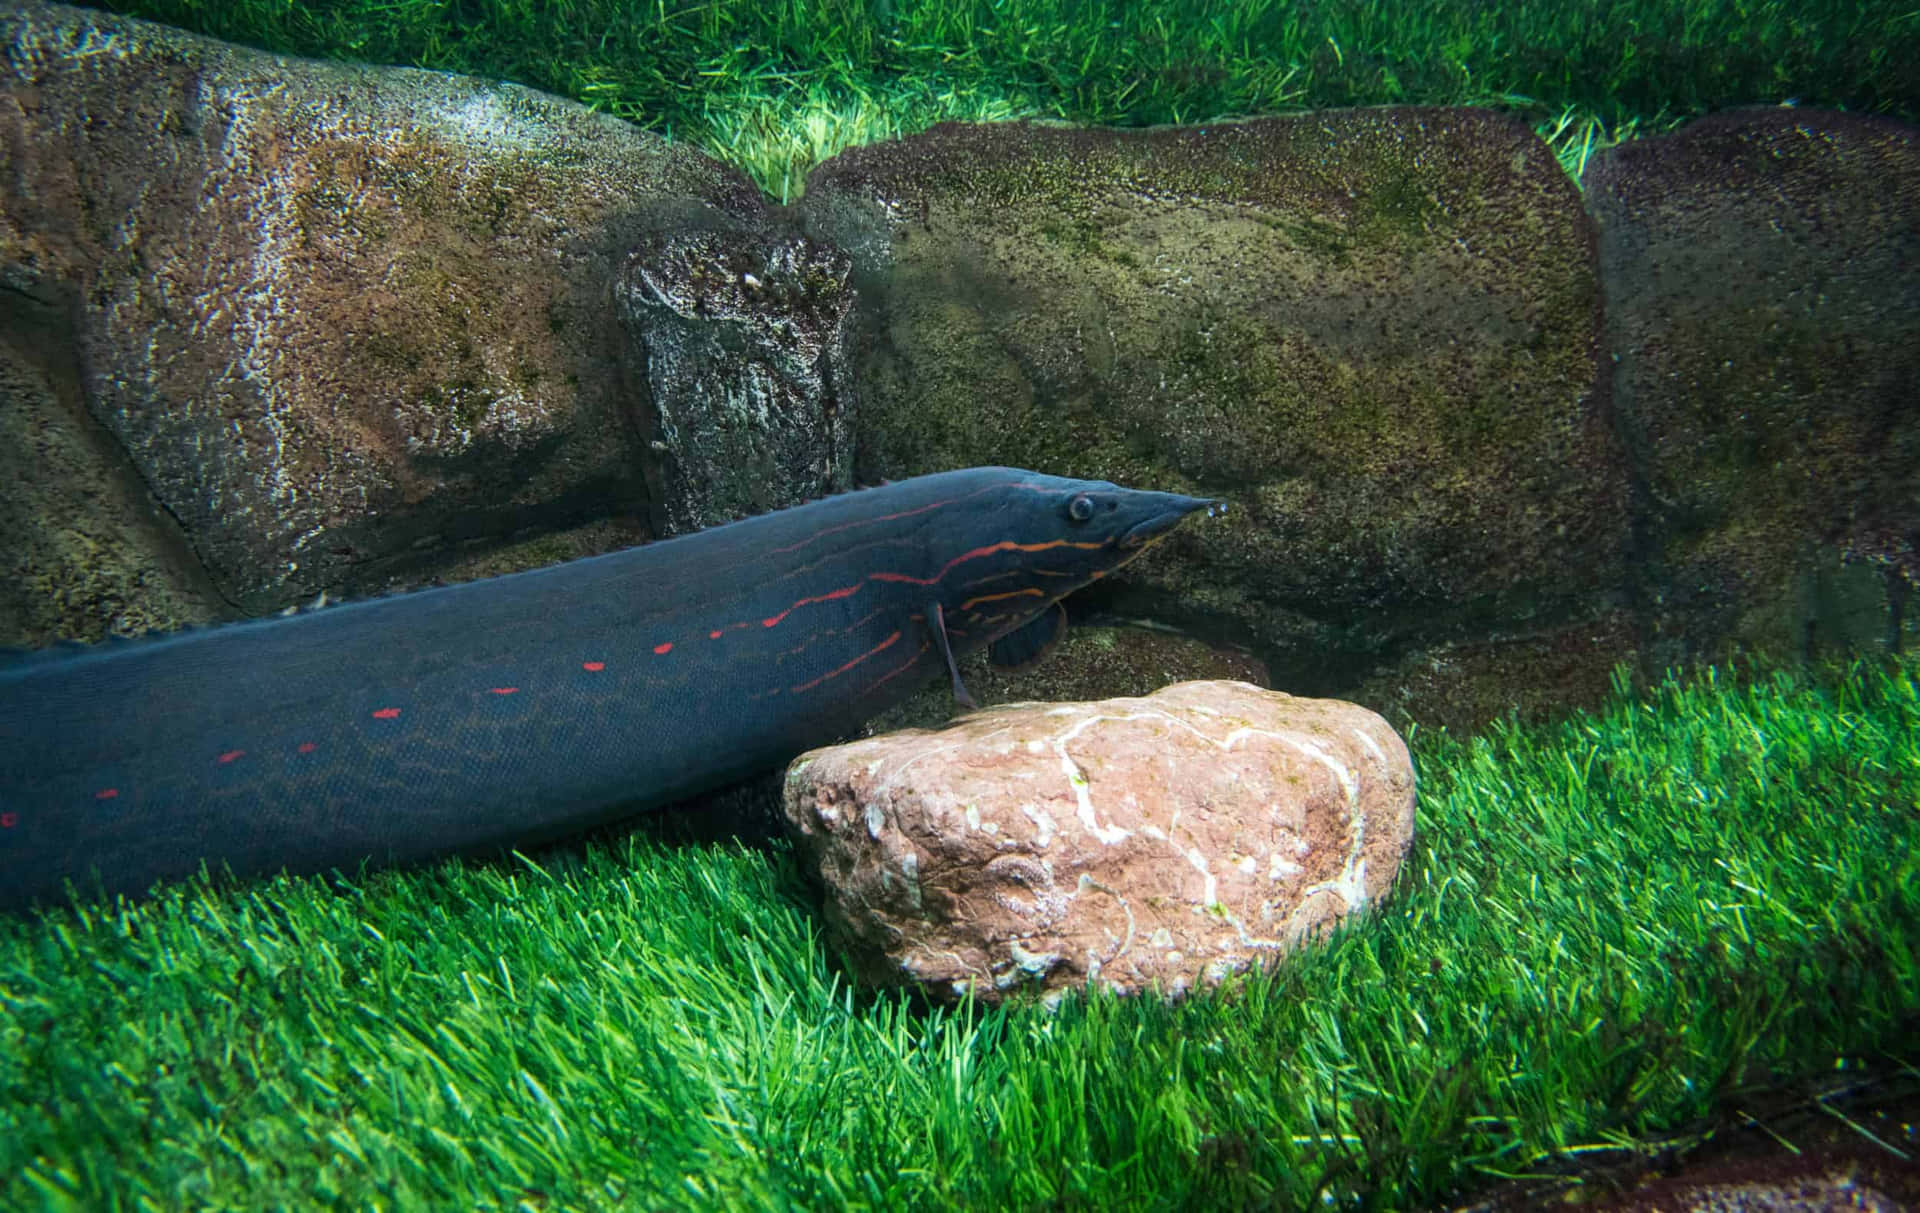 An eel swimming in its natural habitat